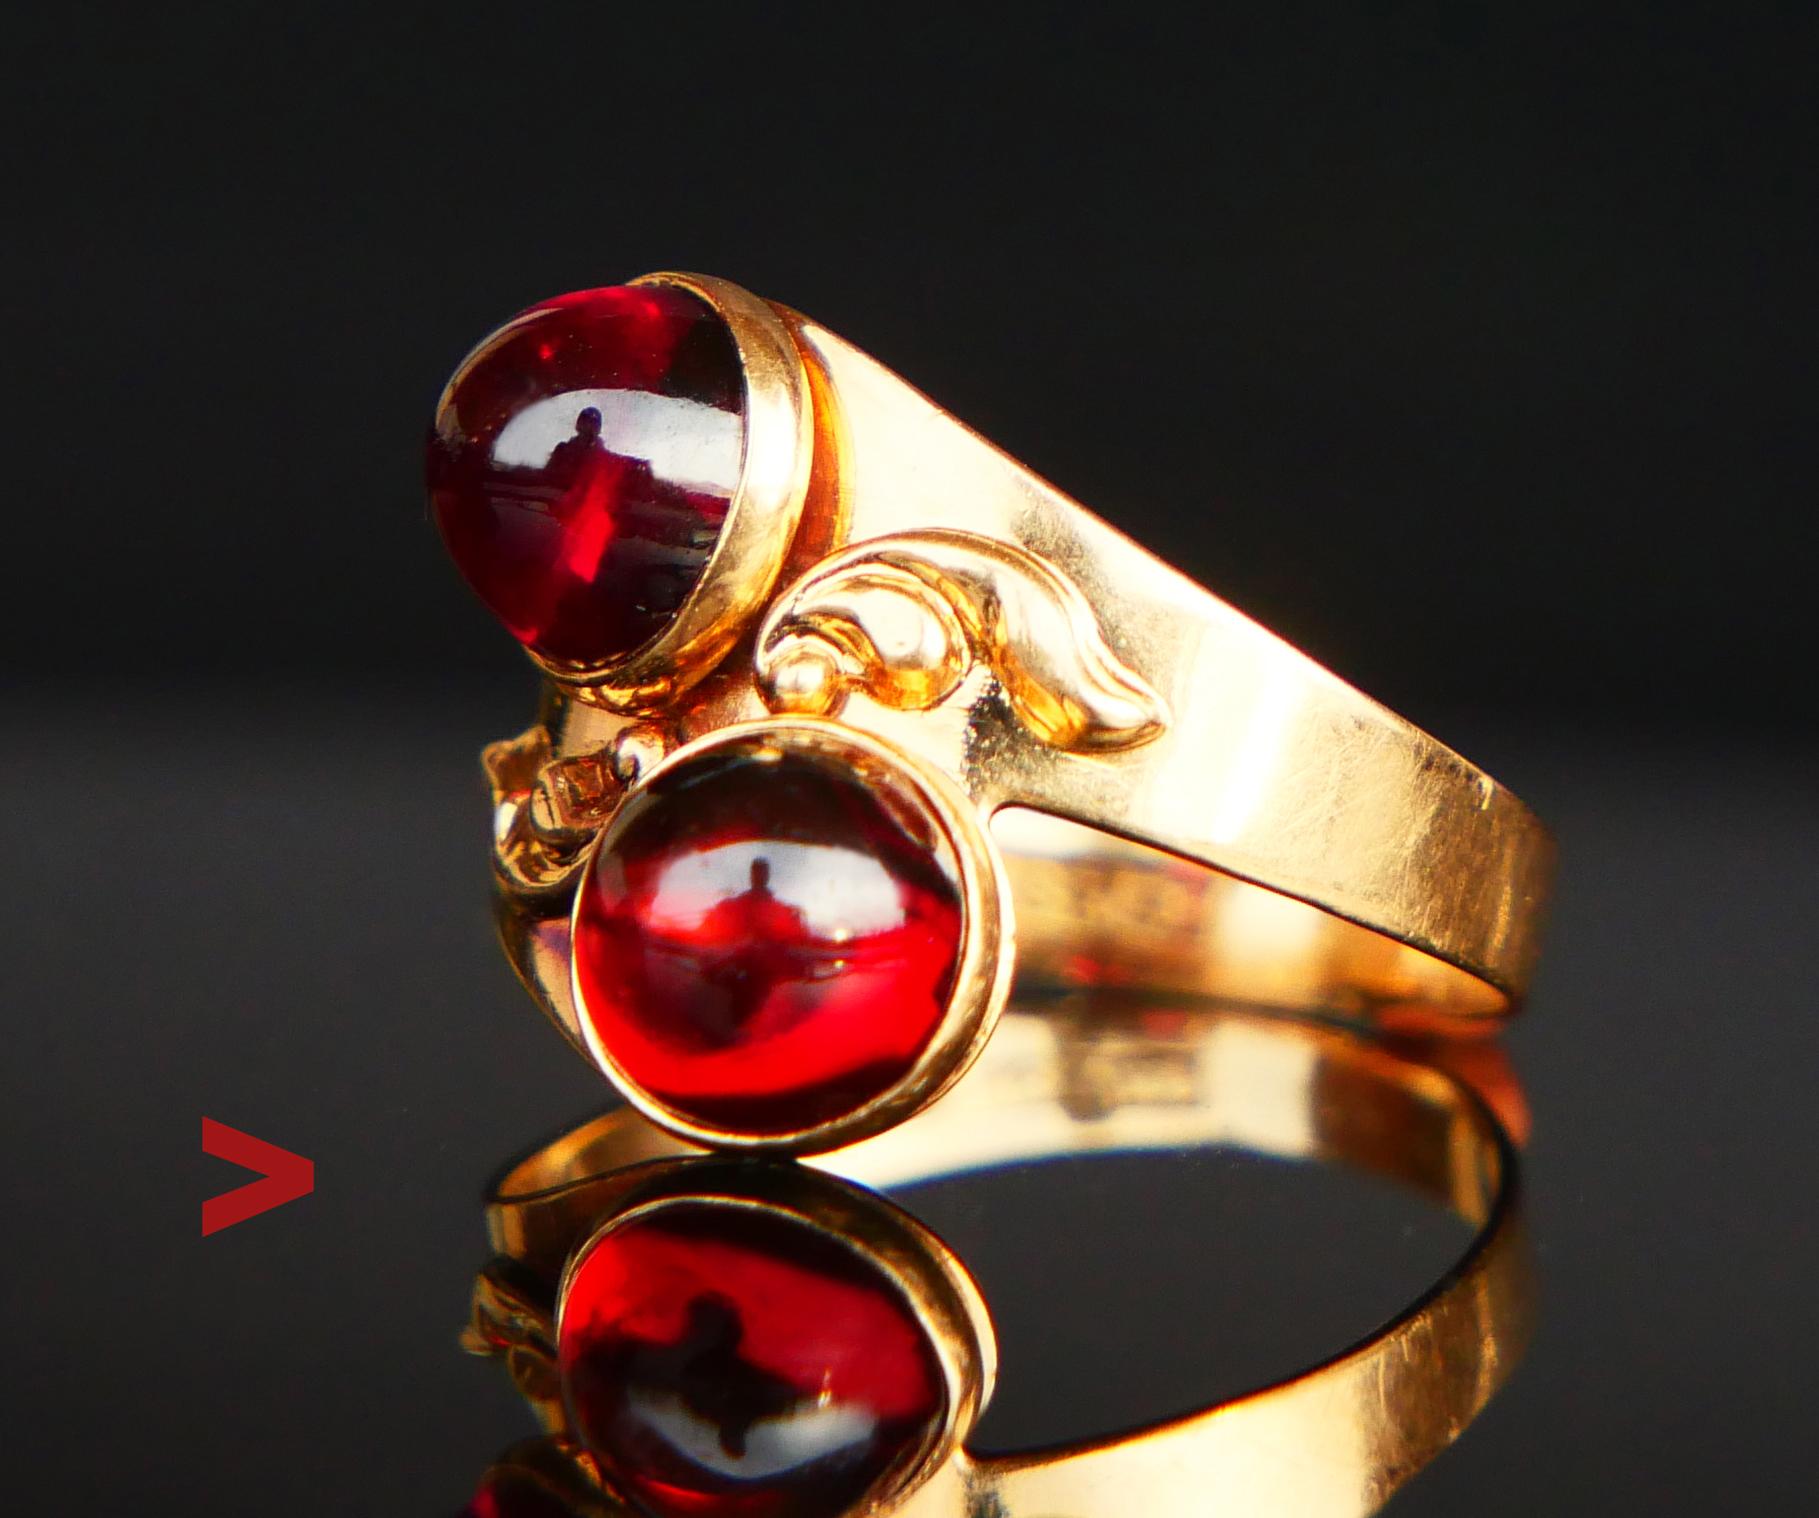 Toi et Moi Ring featuring twisted frame in solid 18K Reddish Gold with two bezel set cabochon cut natural Red Rubellite / Tourmalines Ø 6 mm x 4 mm deep / 1.25 ct. each. Total weight ca. 2.5 ctw.

Swedish hallmarks, 18K, maker's initials, year